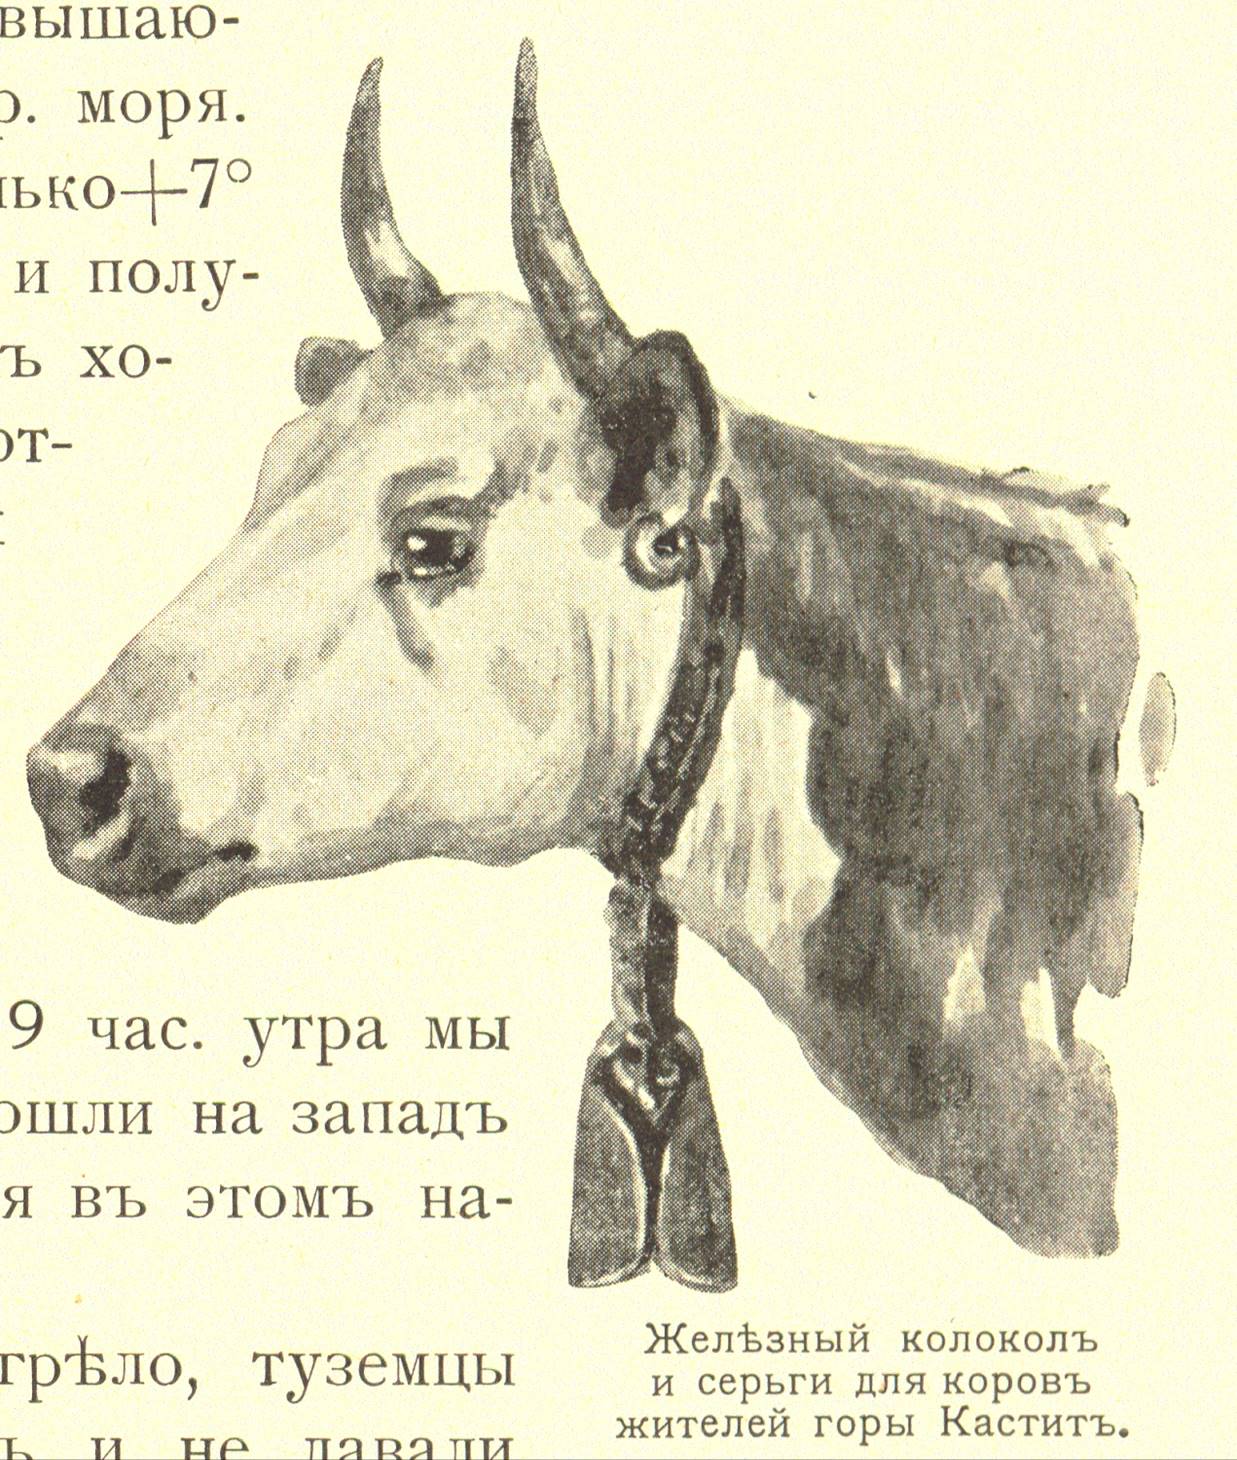 http://www.seltzerbooks.com/bulatovichphotos/illustrations/iron%20bell%20and%20earring%20for%20cattle.jpg